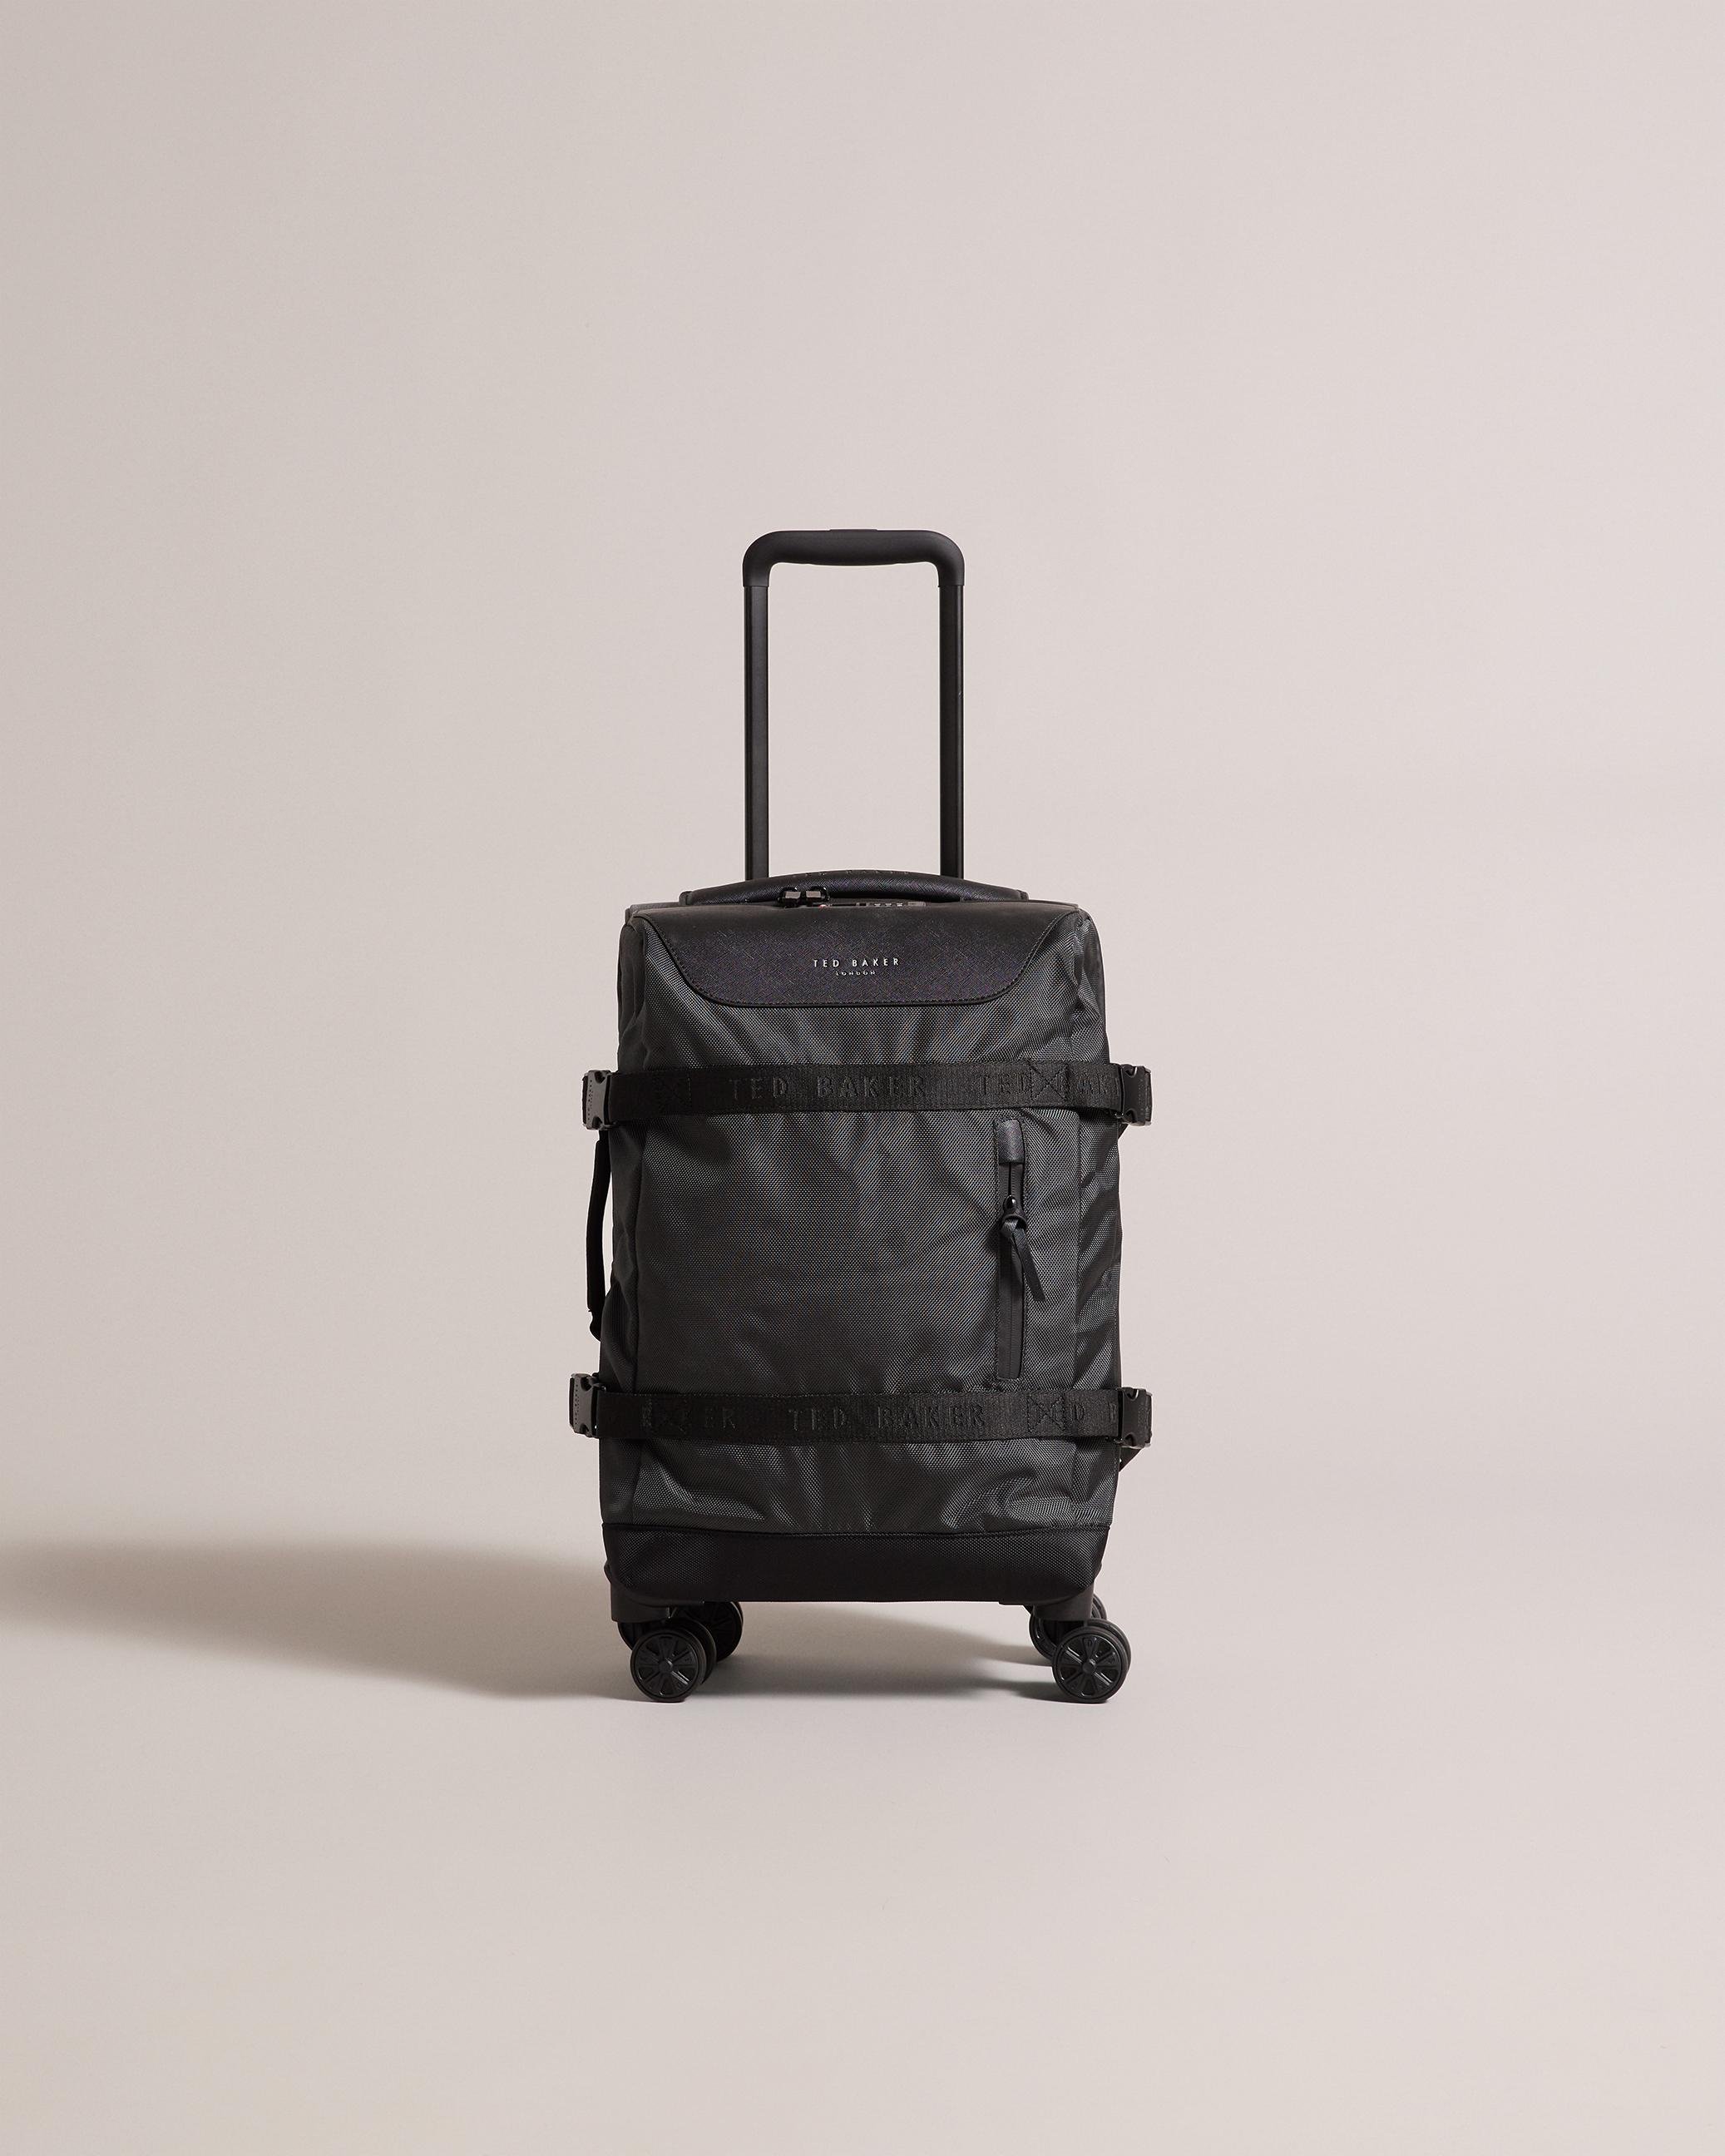 Nomad Small Four Wheel Trolley Suitcase - NORMN - Charcoal by TED BAKER